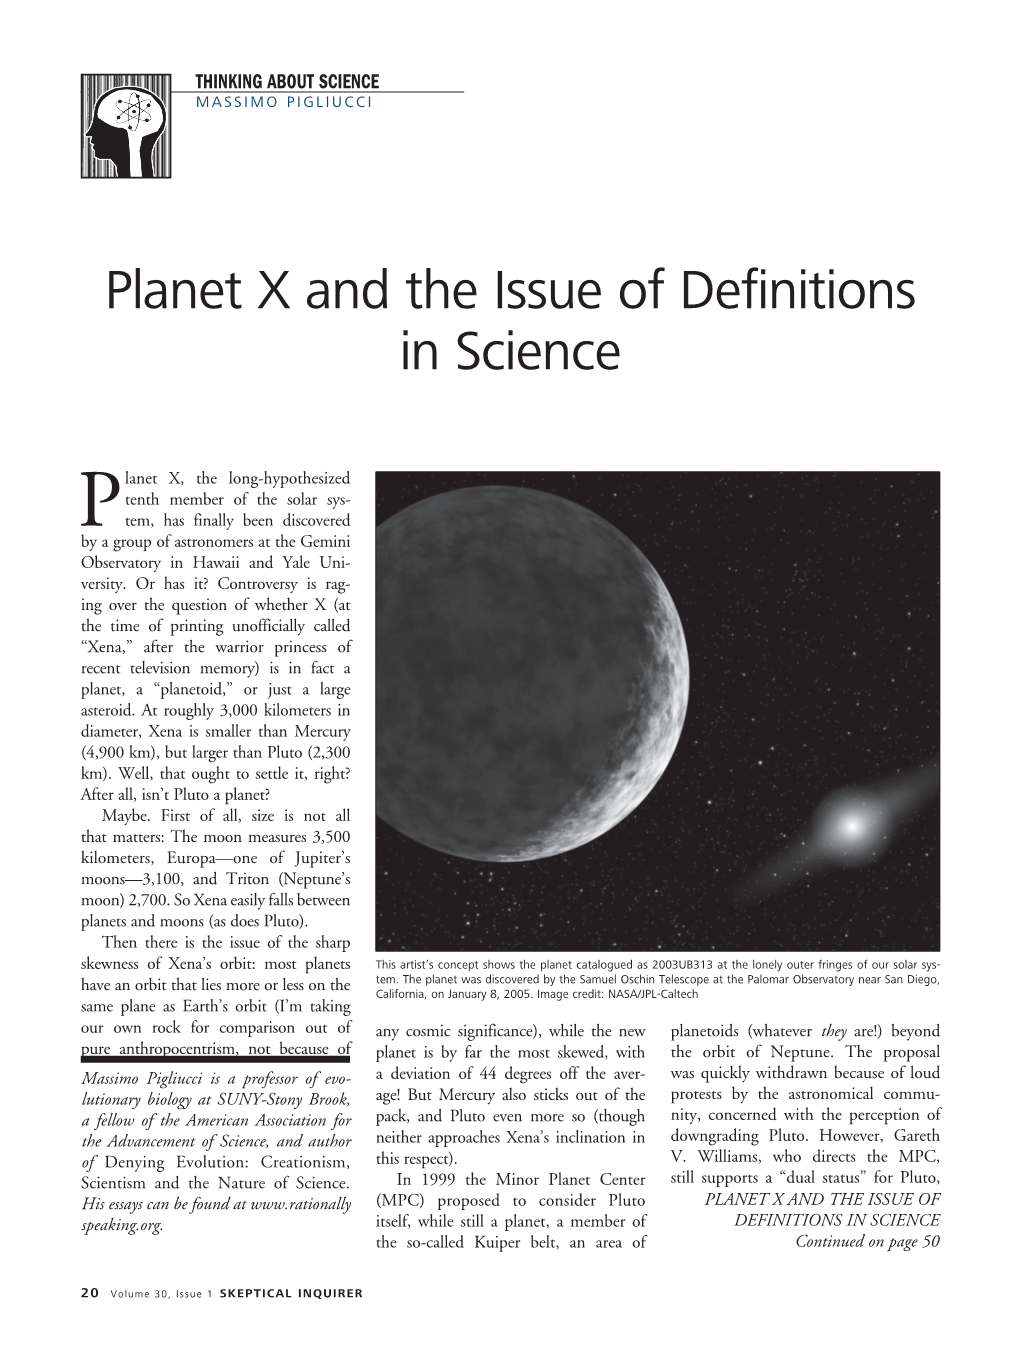 Planet X and the Issue of Definitions in Science